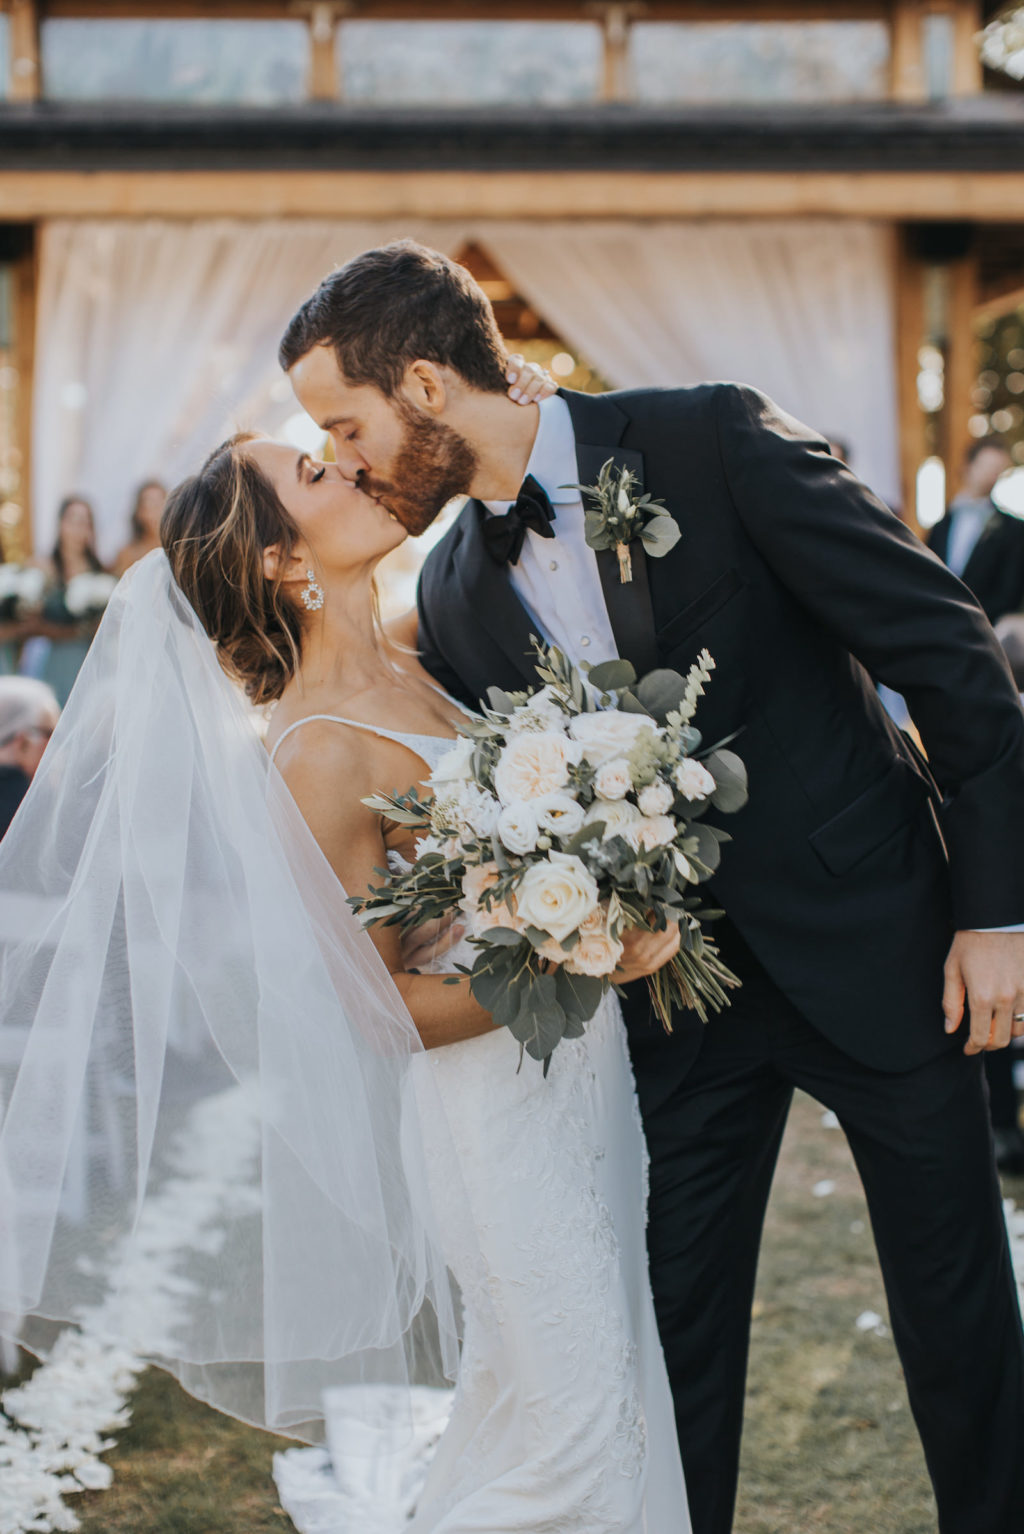 Bride and Groom First Kiss Ceremony Portrait | Bride in Essense of Australia Wedding Gown with Long Train Veil | White and Cream Florals with Greenery Bouquet